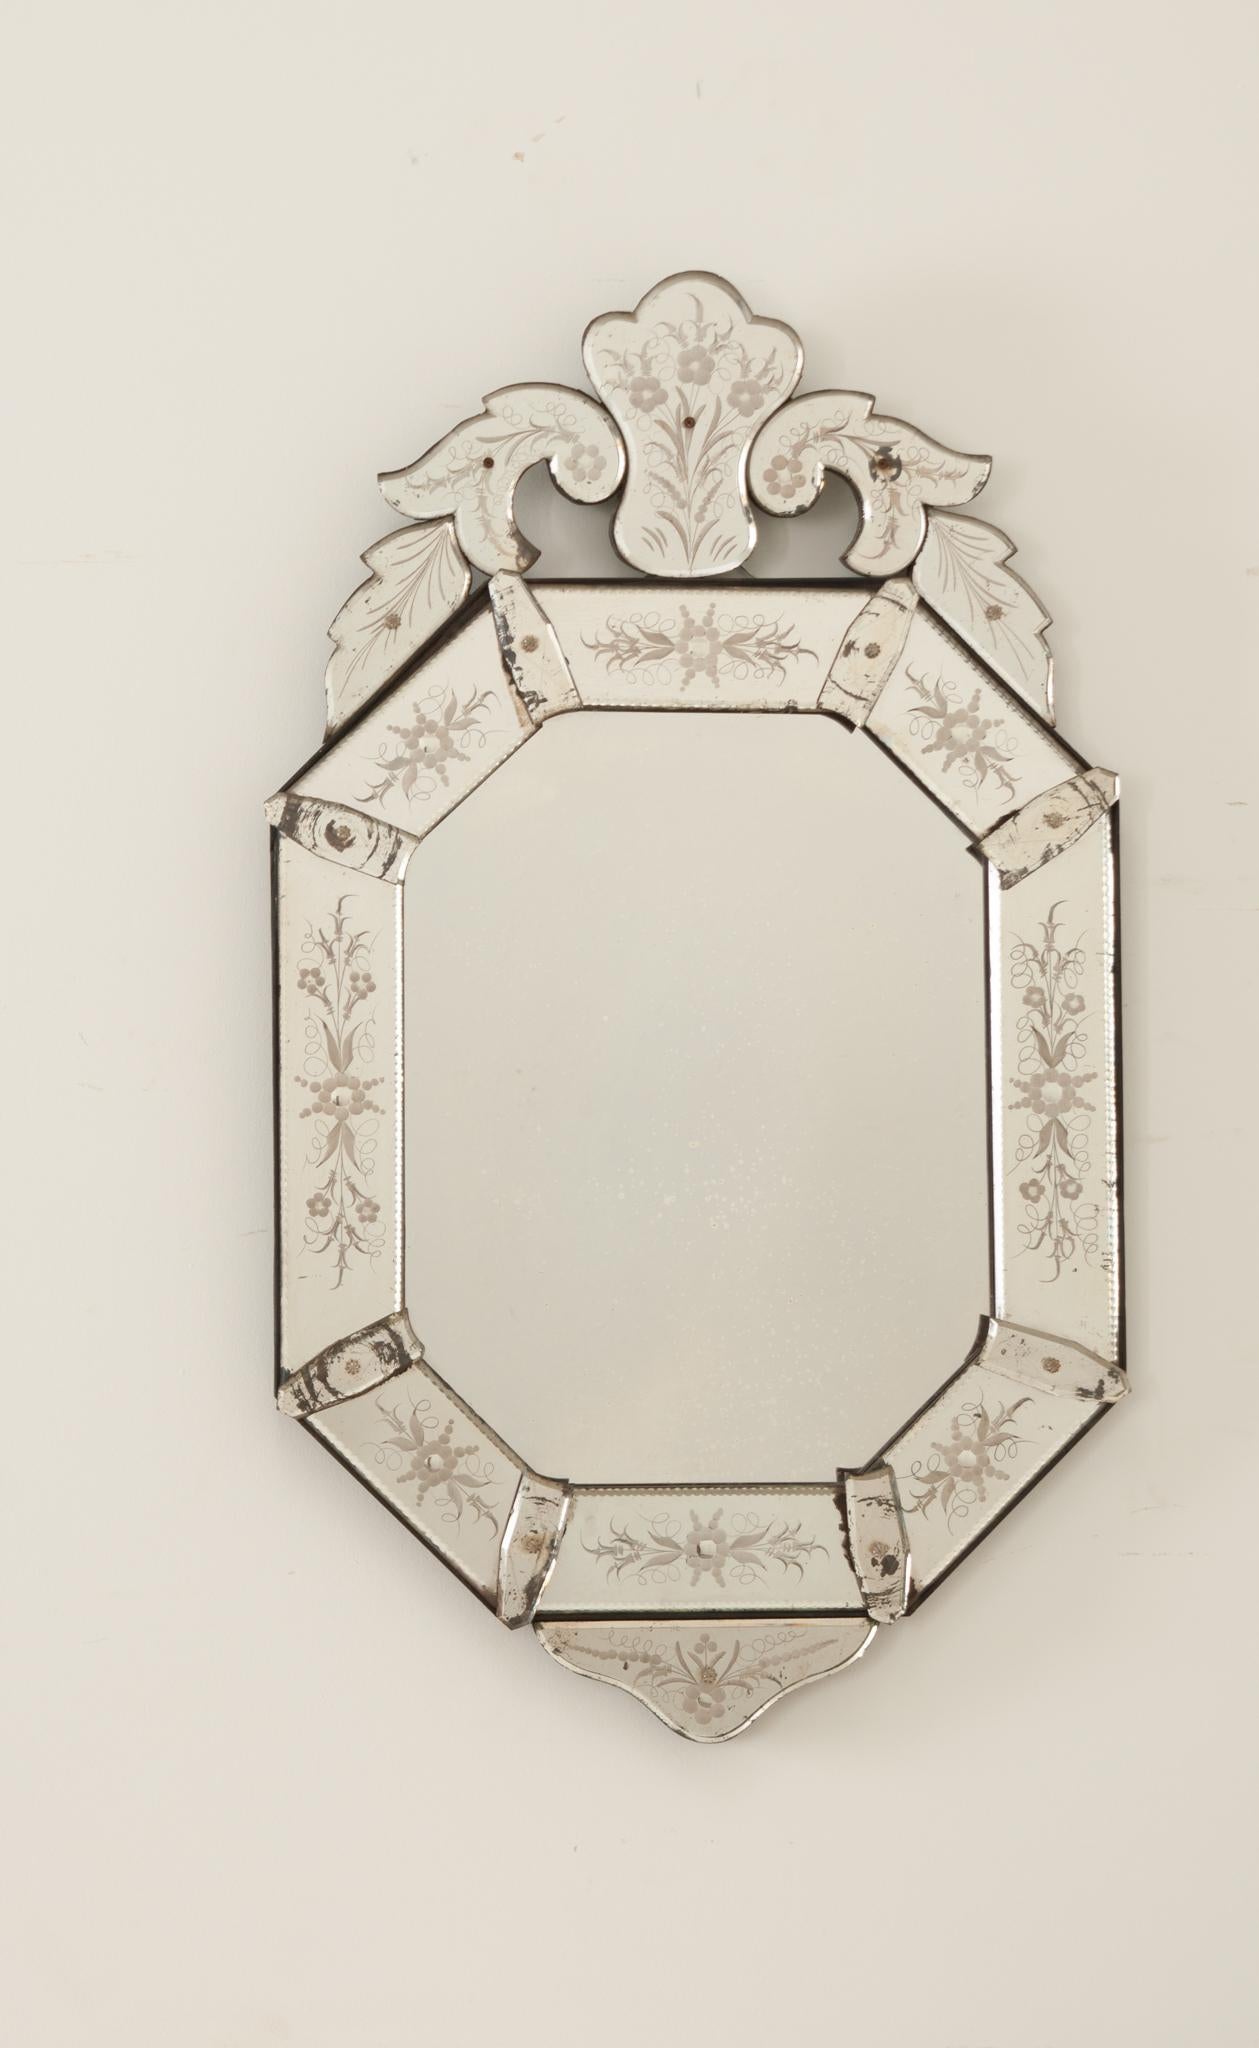 This darling octagonal Venetian mirror was handcrafted during the 19th century in Italy with old world charm in mind. This antique has beautifully shaped mirror pieces, held together with fasteners that are capped in crystal. Every aspect of the